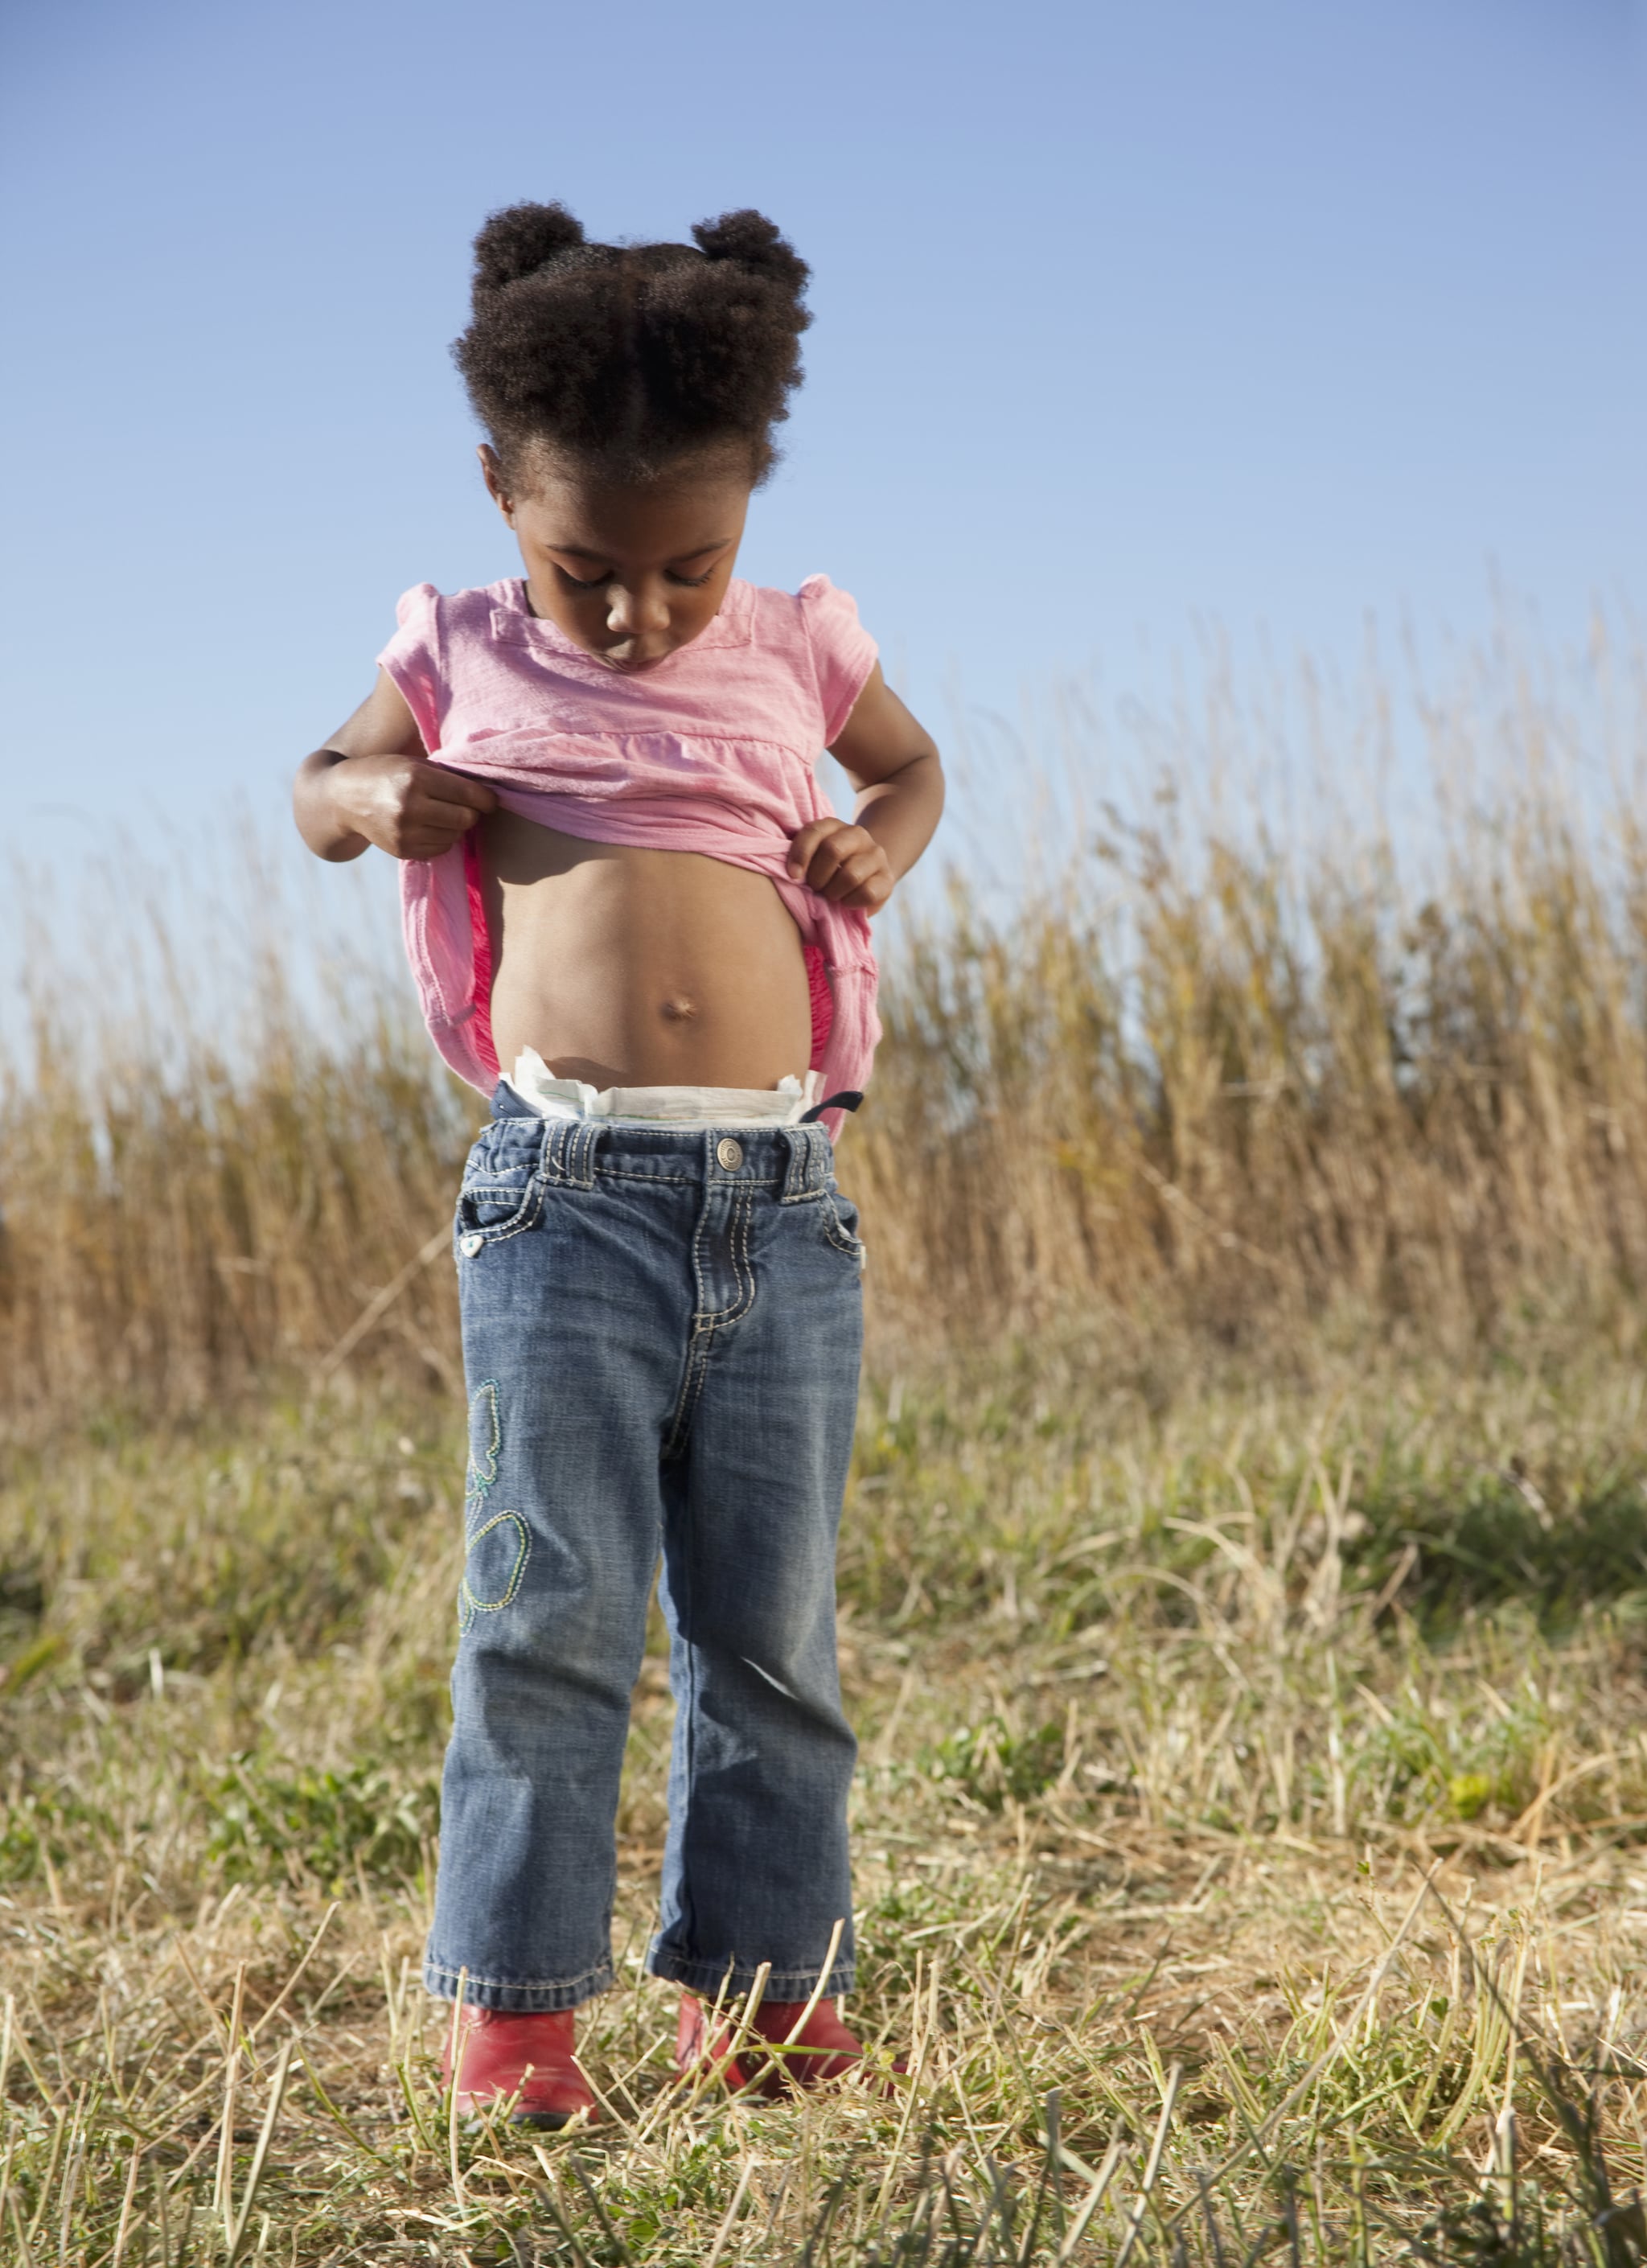 Why Is My Child Obsessed With Their Belly Button? | POPSUGAR Family